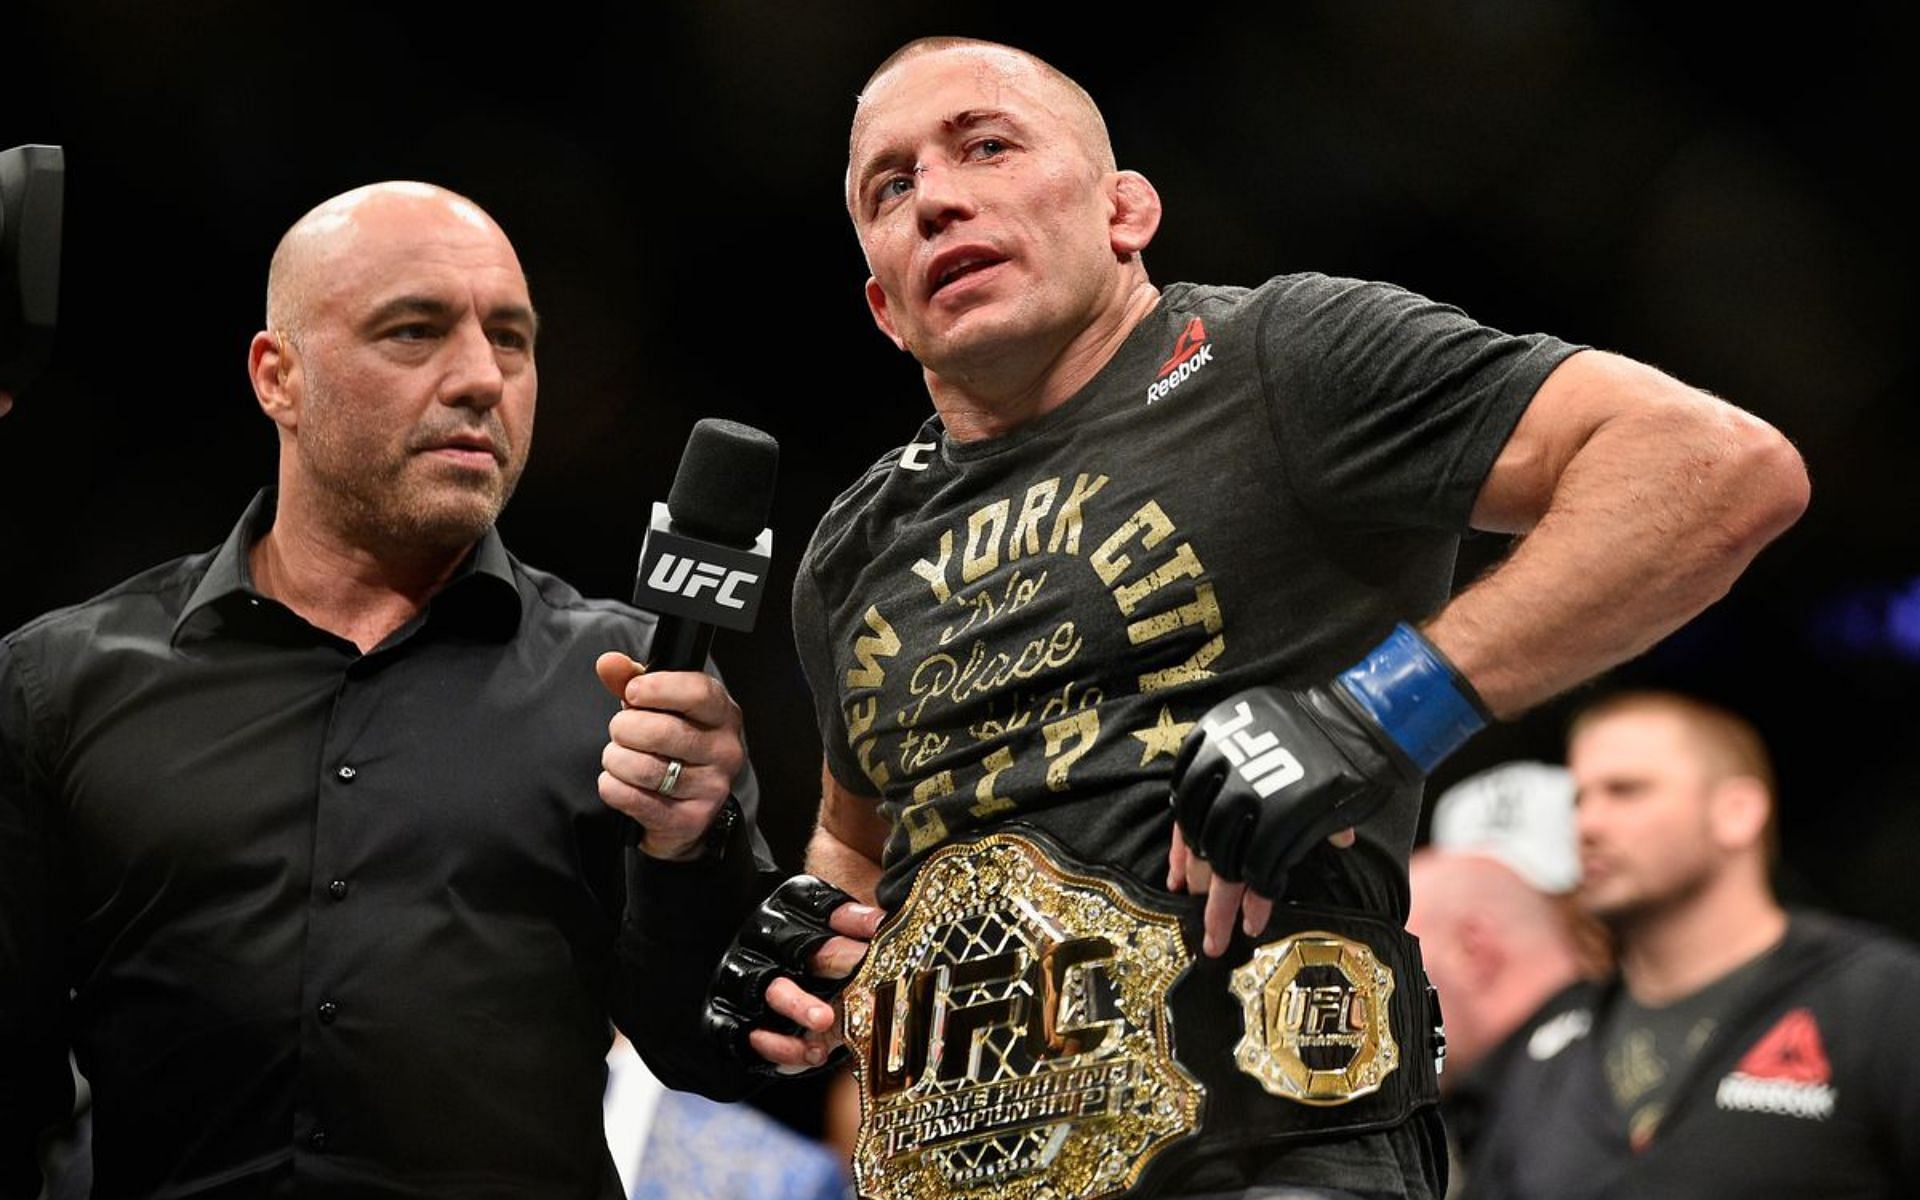 Legendary former welterweight champion Georges St-Pierre was a fighting chameleon of sorts who often surprised his opponents with slick gameplans